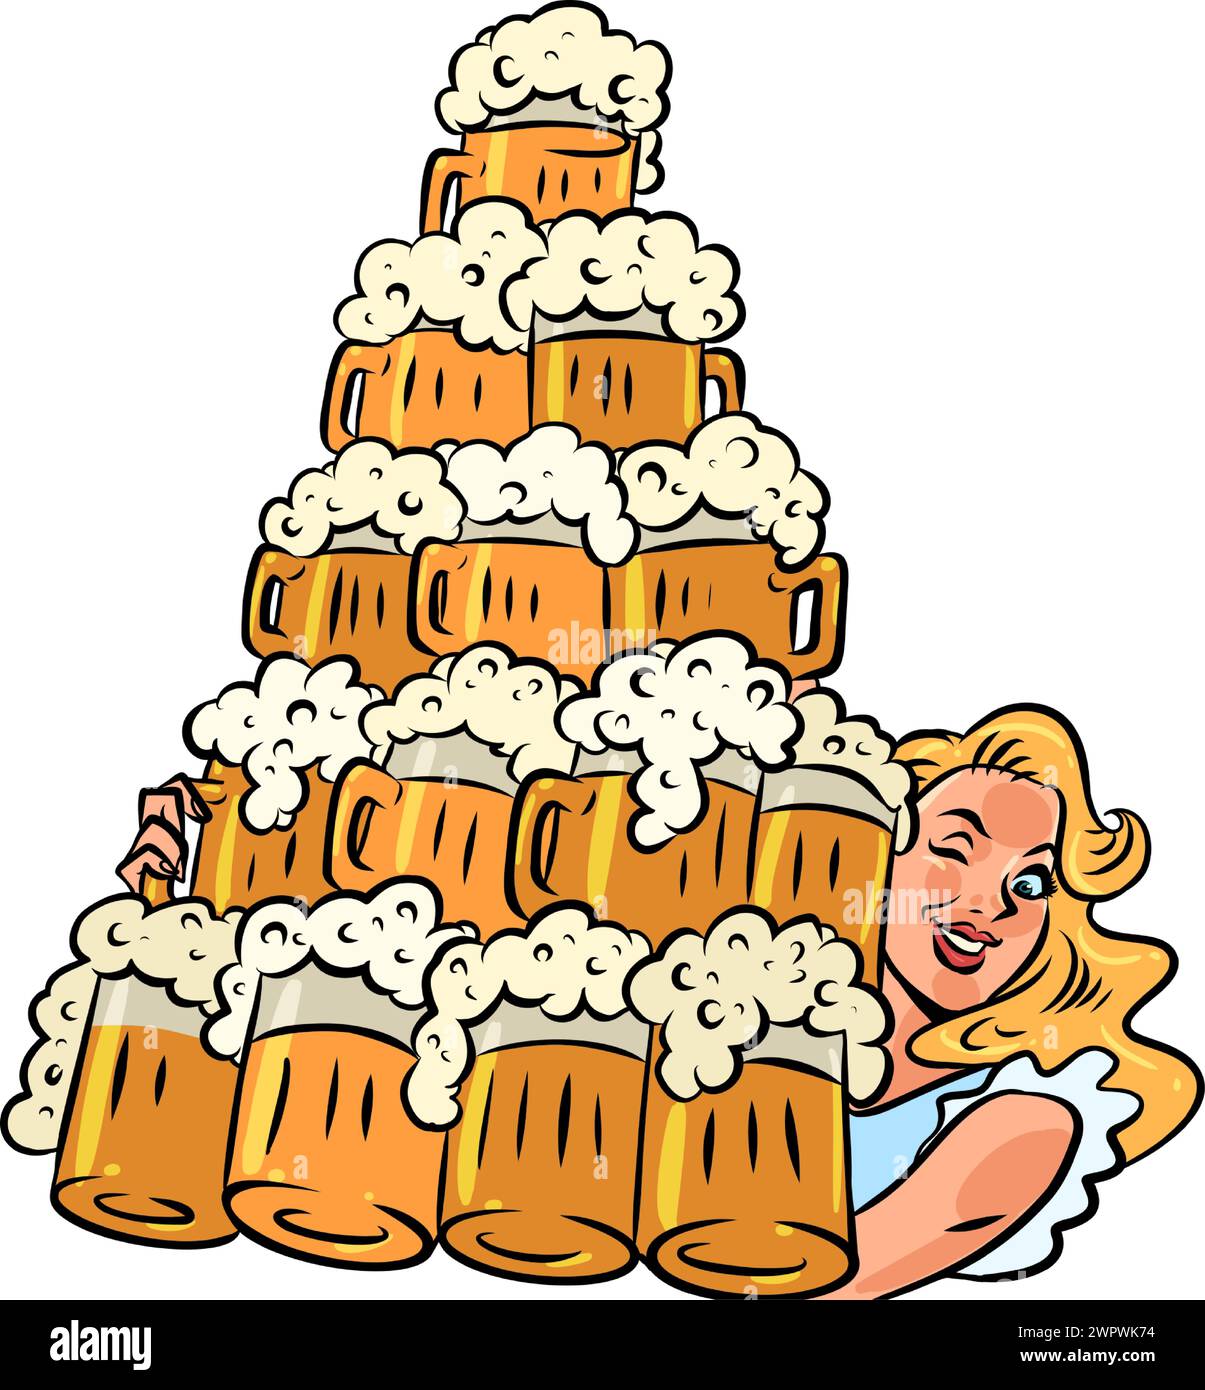 The girl offers excellent foamy beer to visitors. Great deals for a bar, tavern or restaurant. The waitress does a fantastic job for the establishment Stock Vector